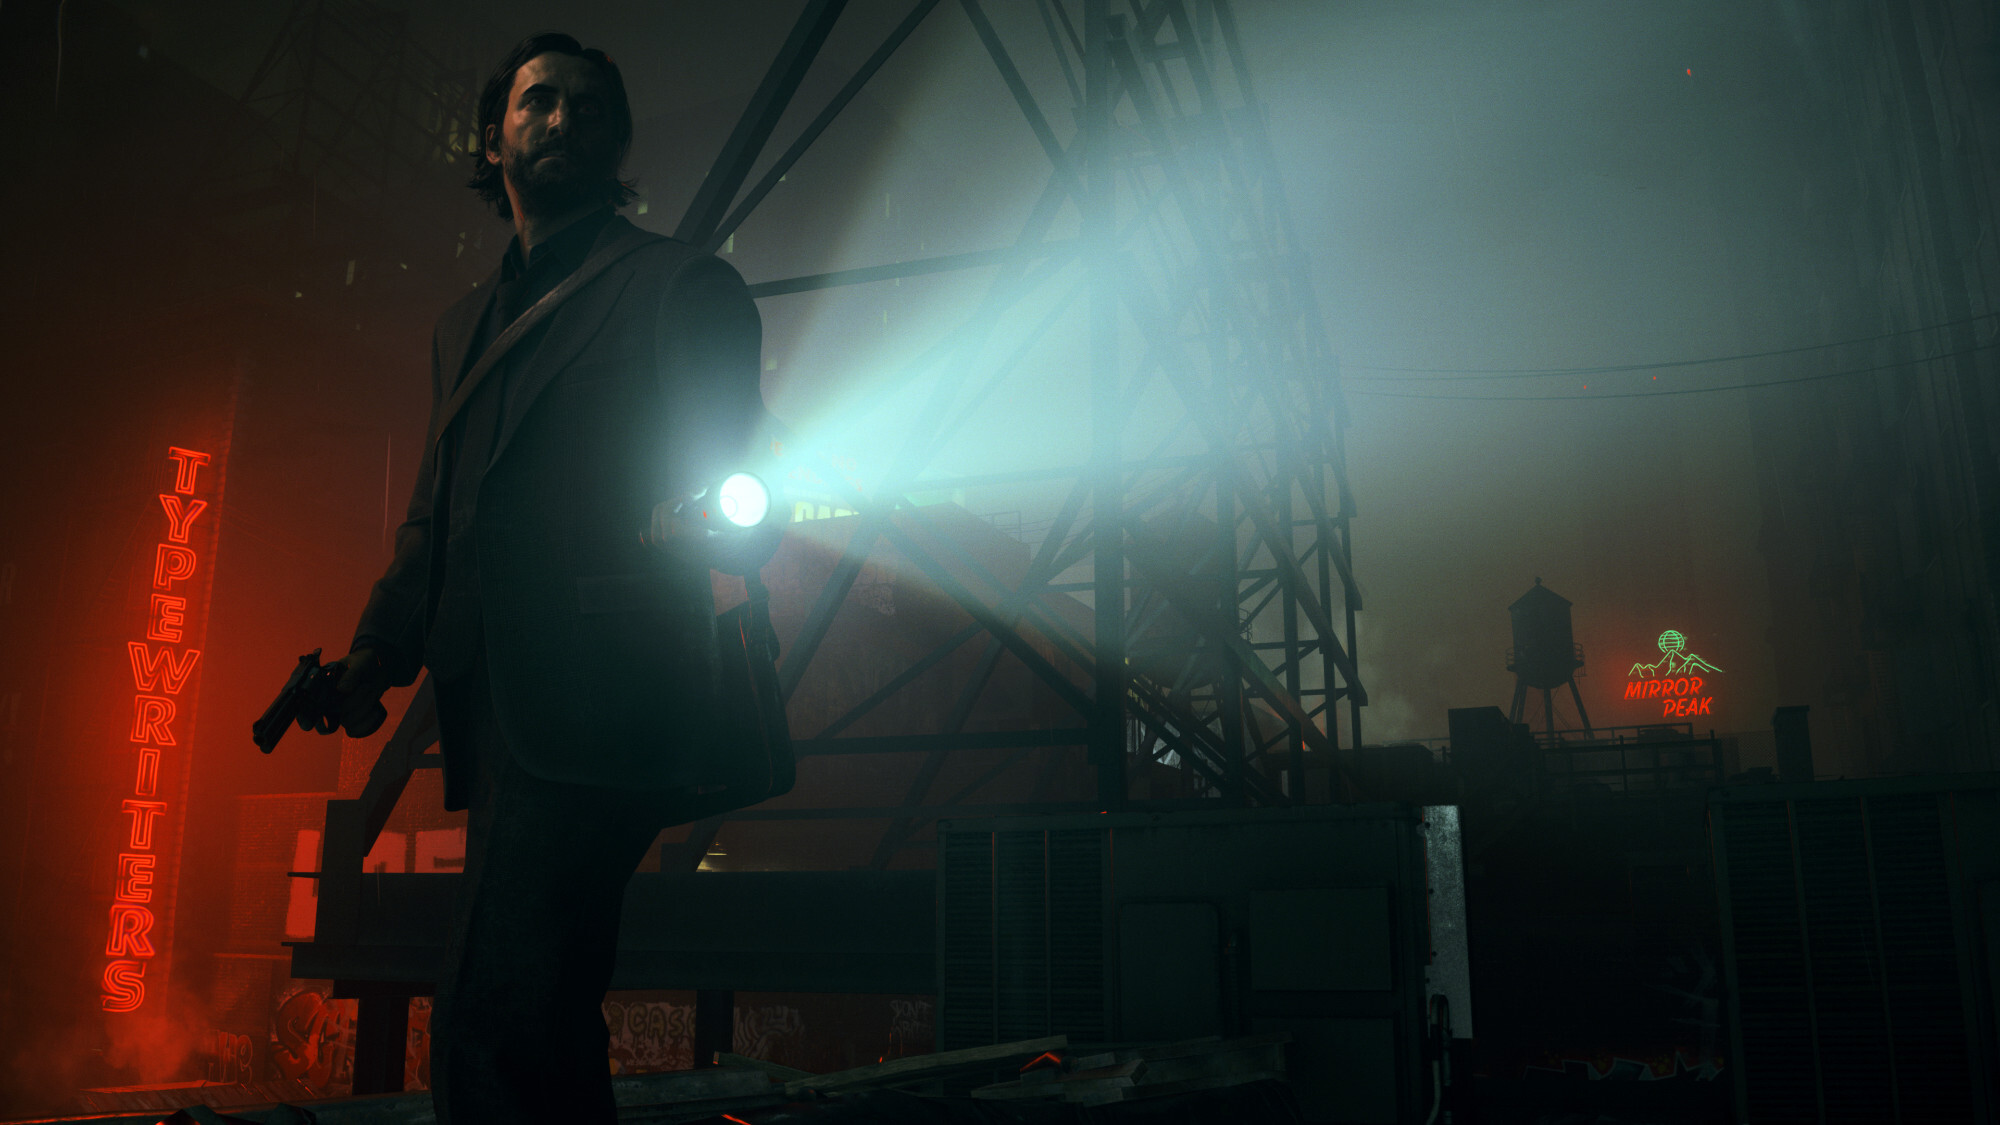 Video game character Alan Wake shines a flashlight in the dark. Behind him is a red glowing neon sign that reads "typewriters."